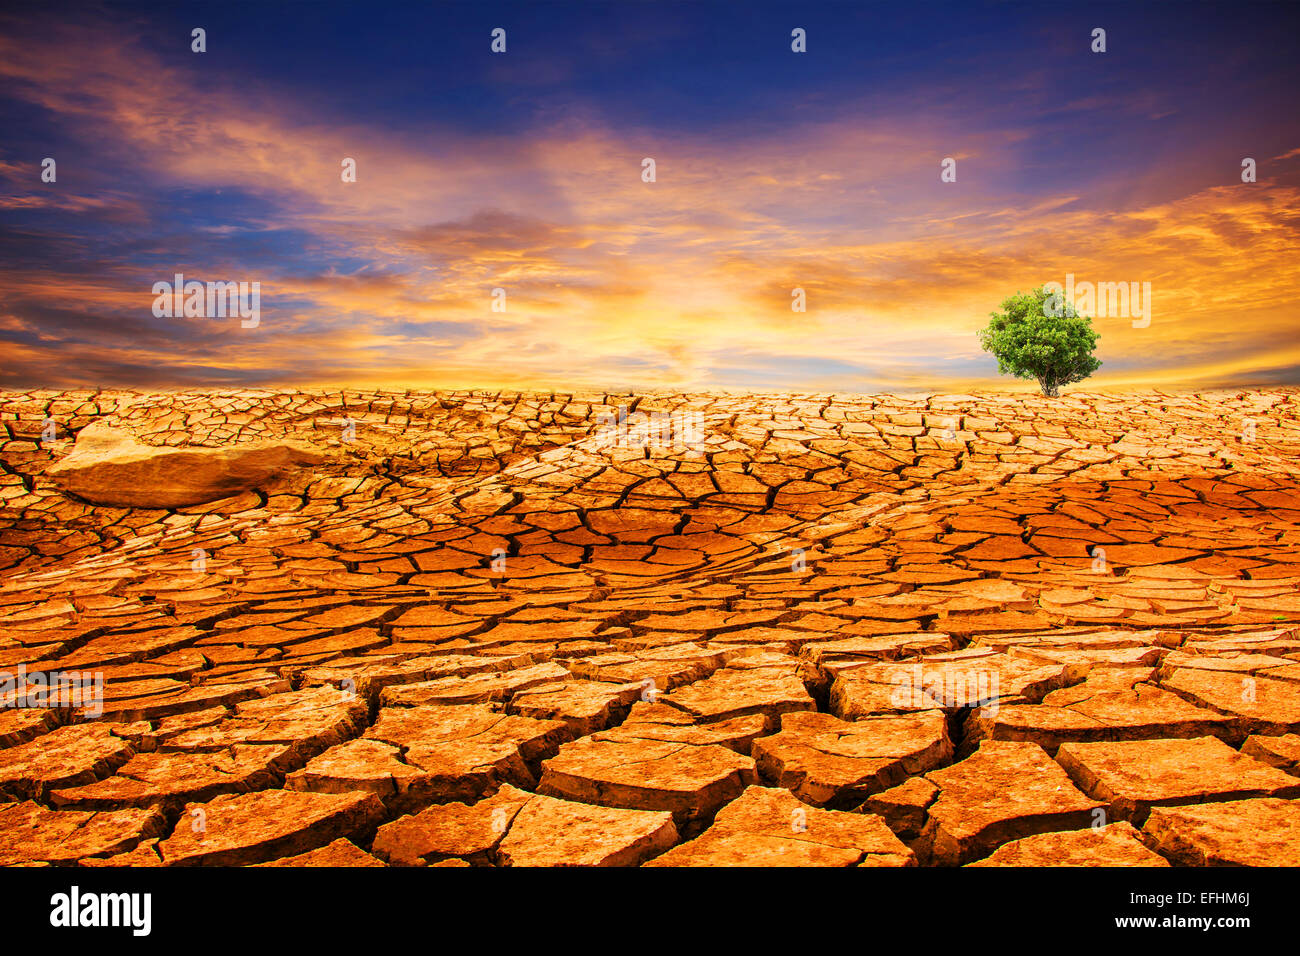 drought cracked desert landscape with tree Stock Photo